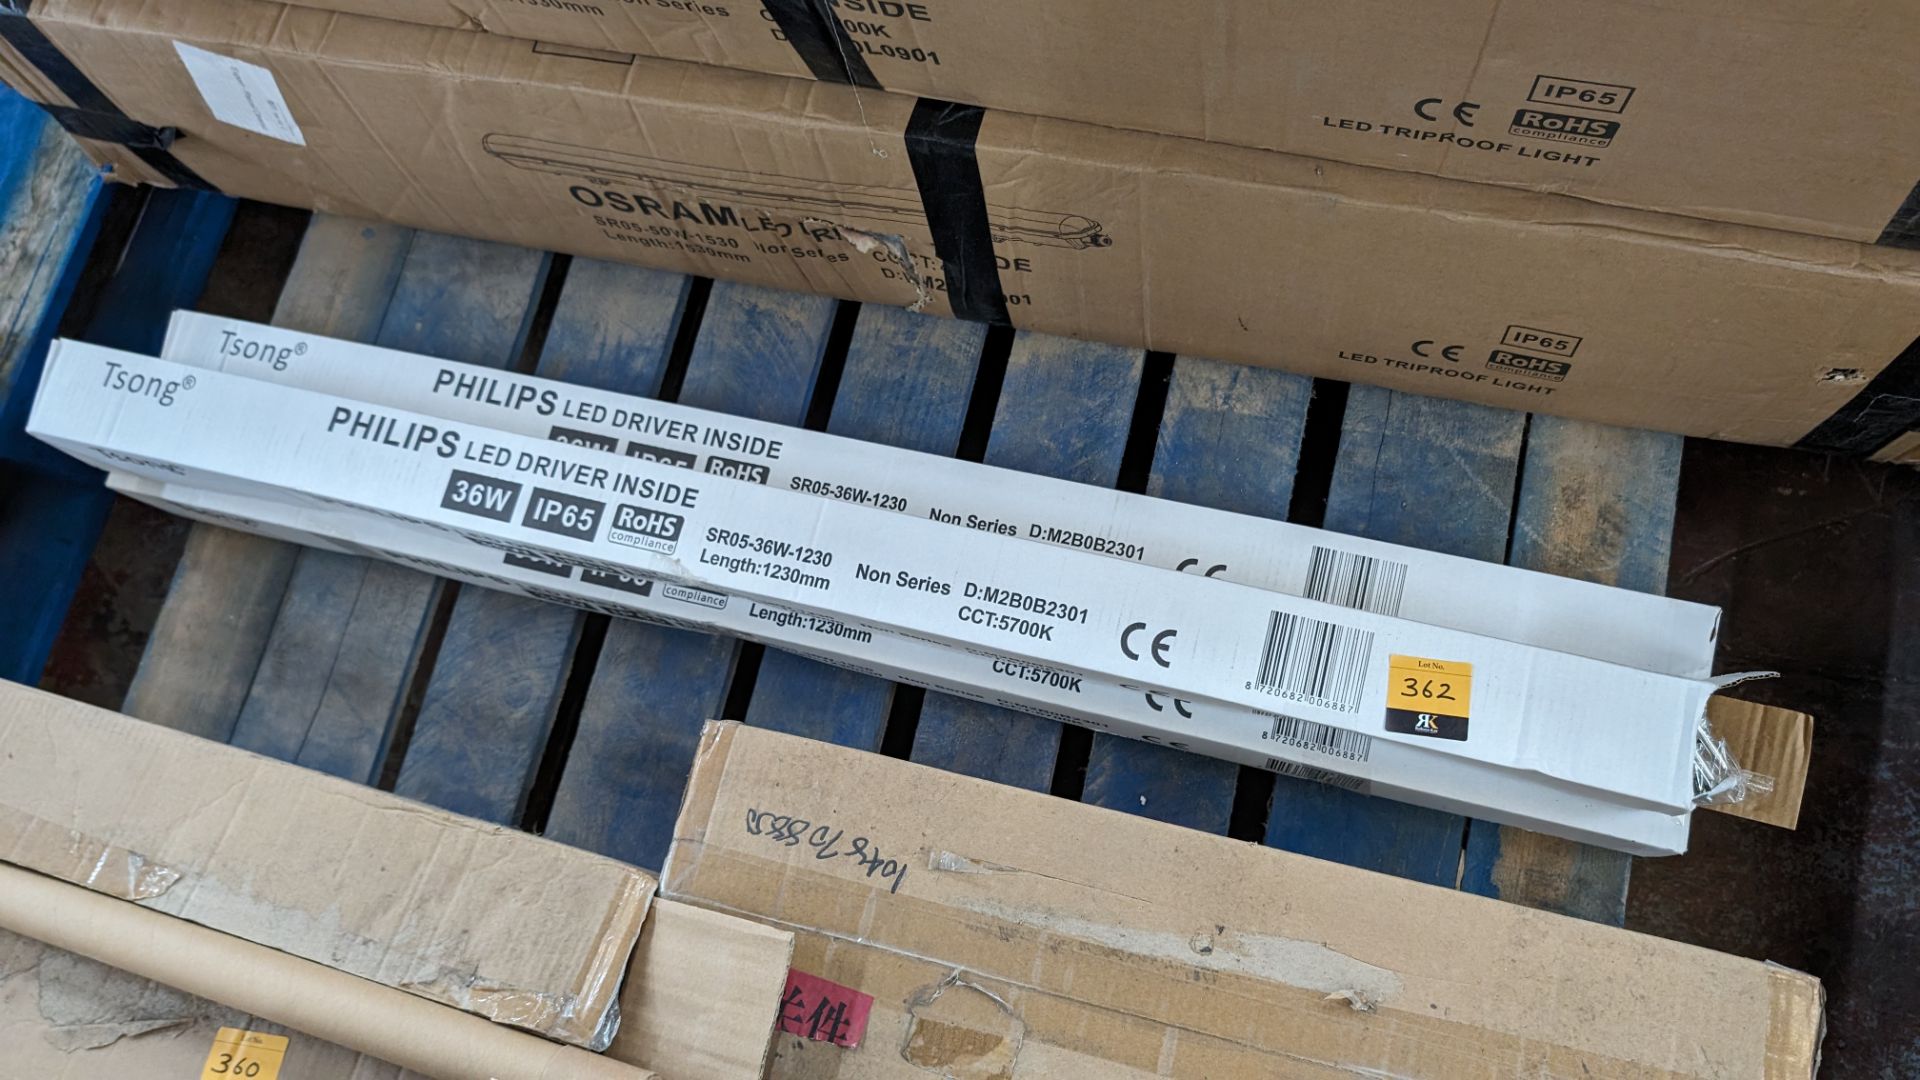 3 off Tsong 36w IP65 1230mm LED batten lamps with Philips LED drivers - Image 2 of 4